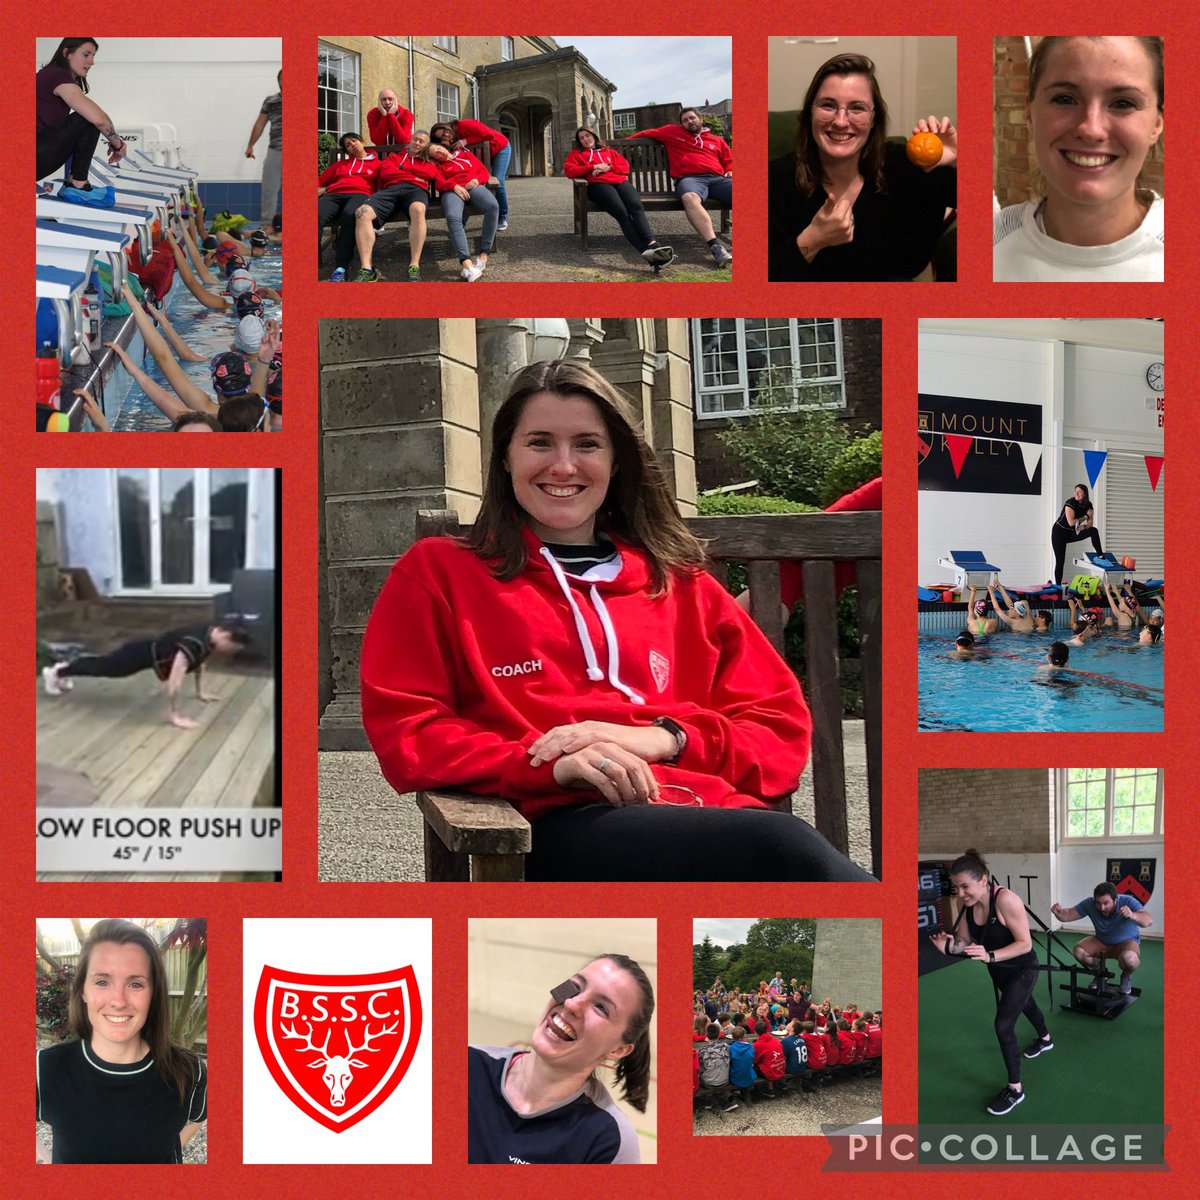 This weekend we said goodbye to Coach Laure. She first joined us in 2018 and in her time with us her enthusiastic and positive coaching (and amazing George Ezra singing!) has resulted in many happy and successful swimmers! Thank you Laure. Good luck in all your future plans.